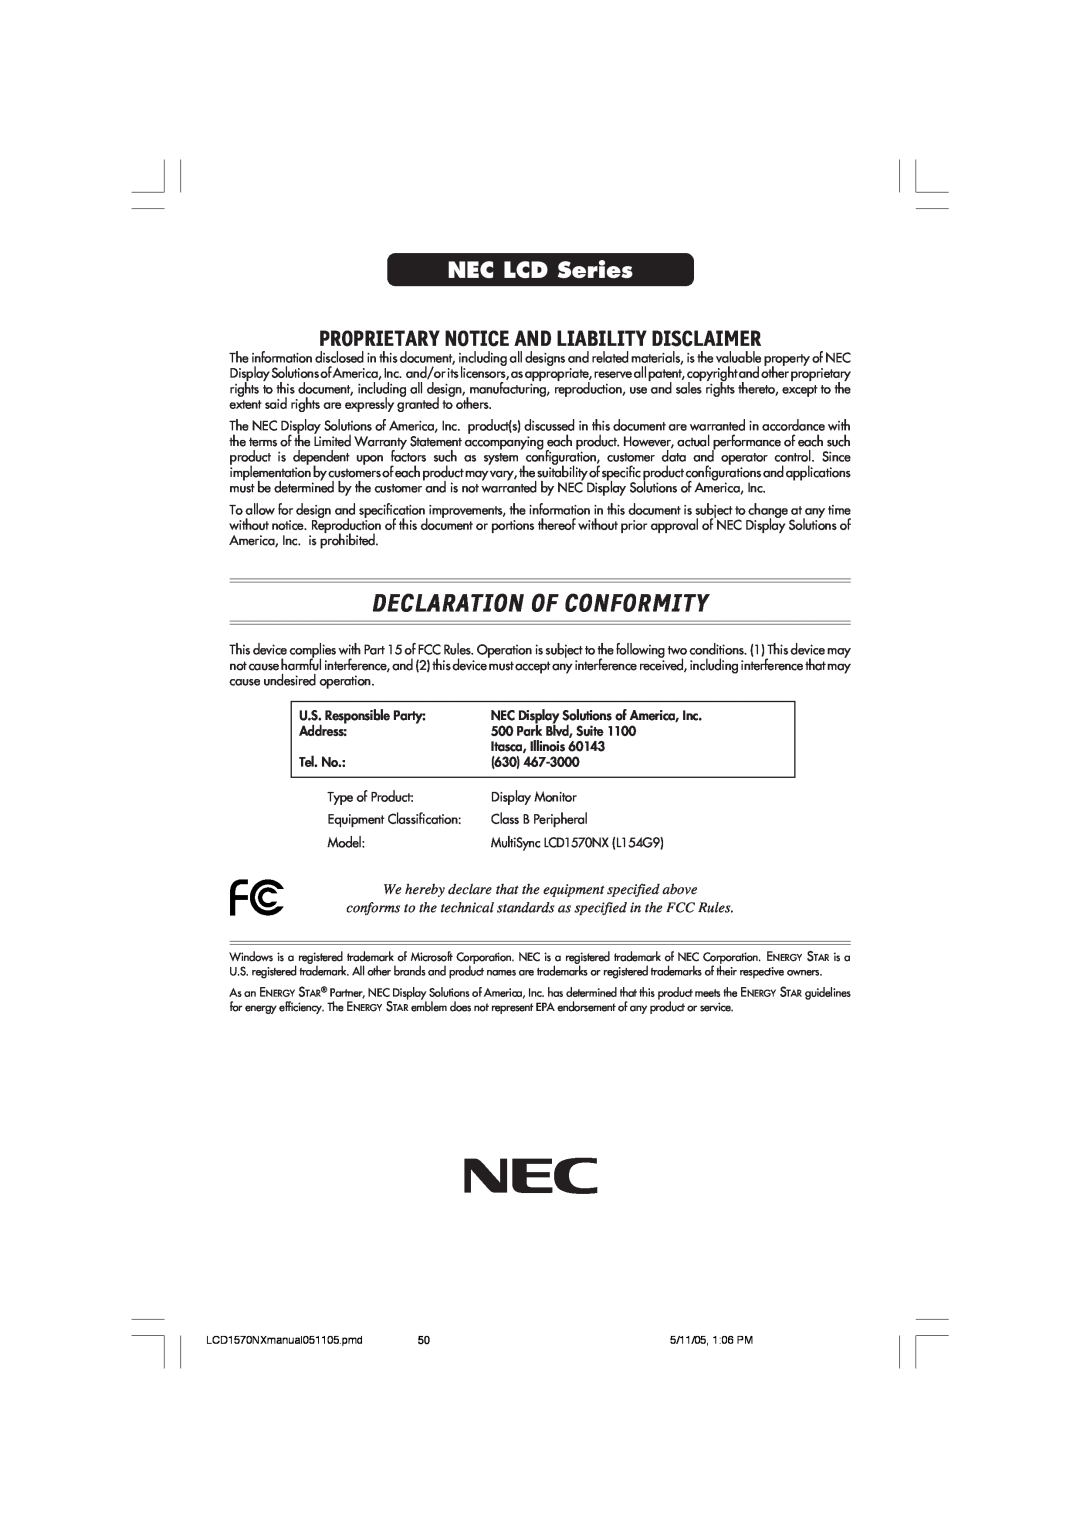 NEC LCD1570NX user manual Declaration Of Conformity, NEC LCD Series, Proprietary Notice And Liability Disclaimer 